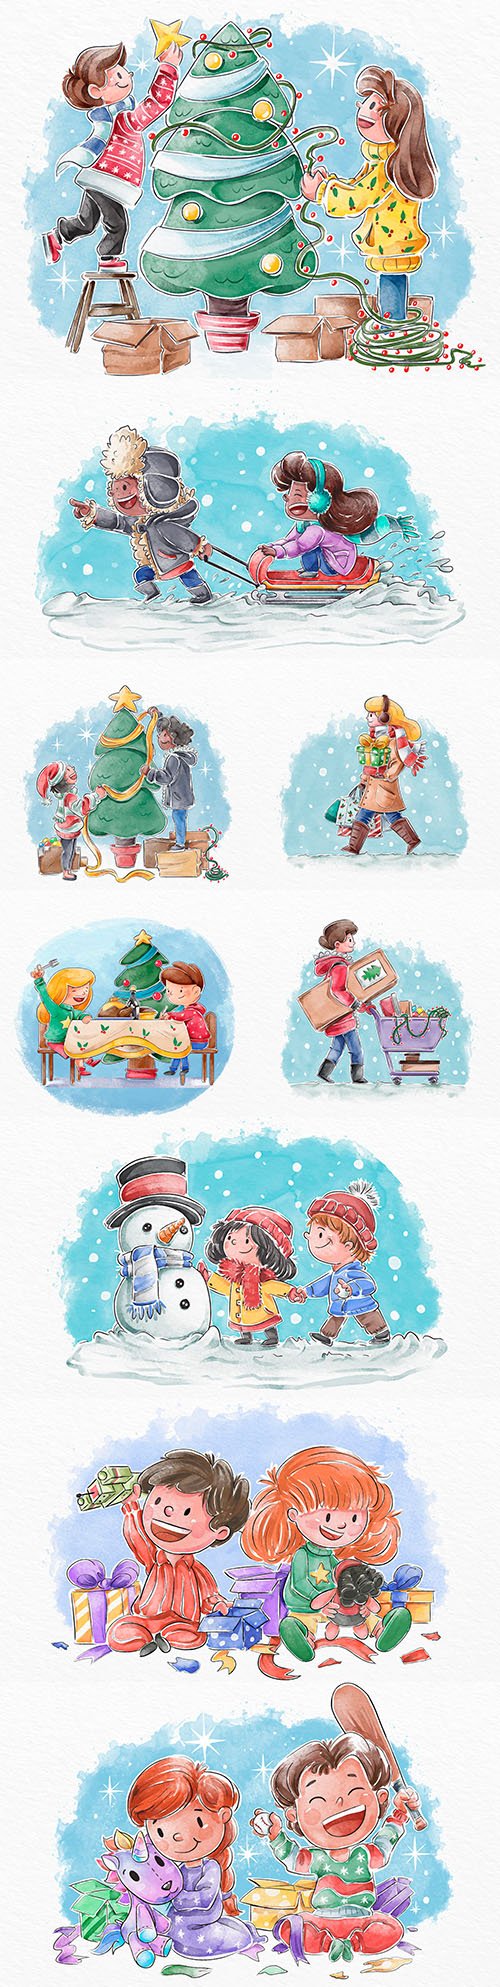 Christmas dinner and gifts illustration of different scenes